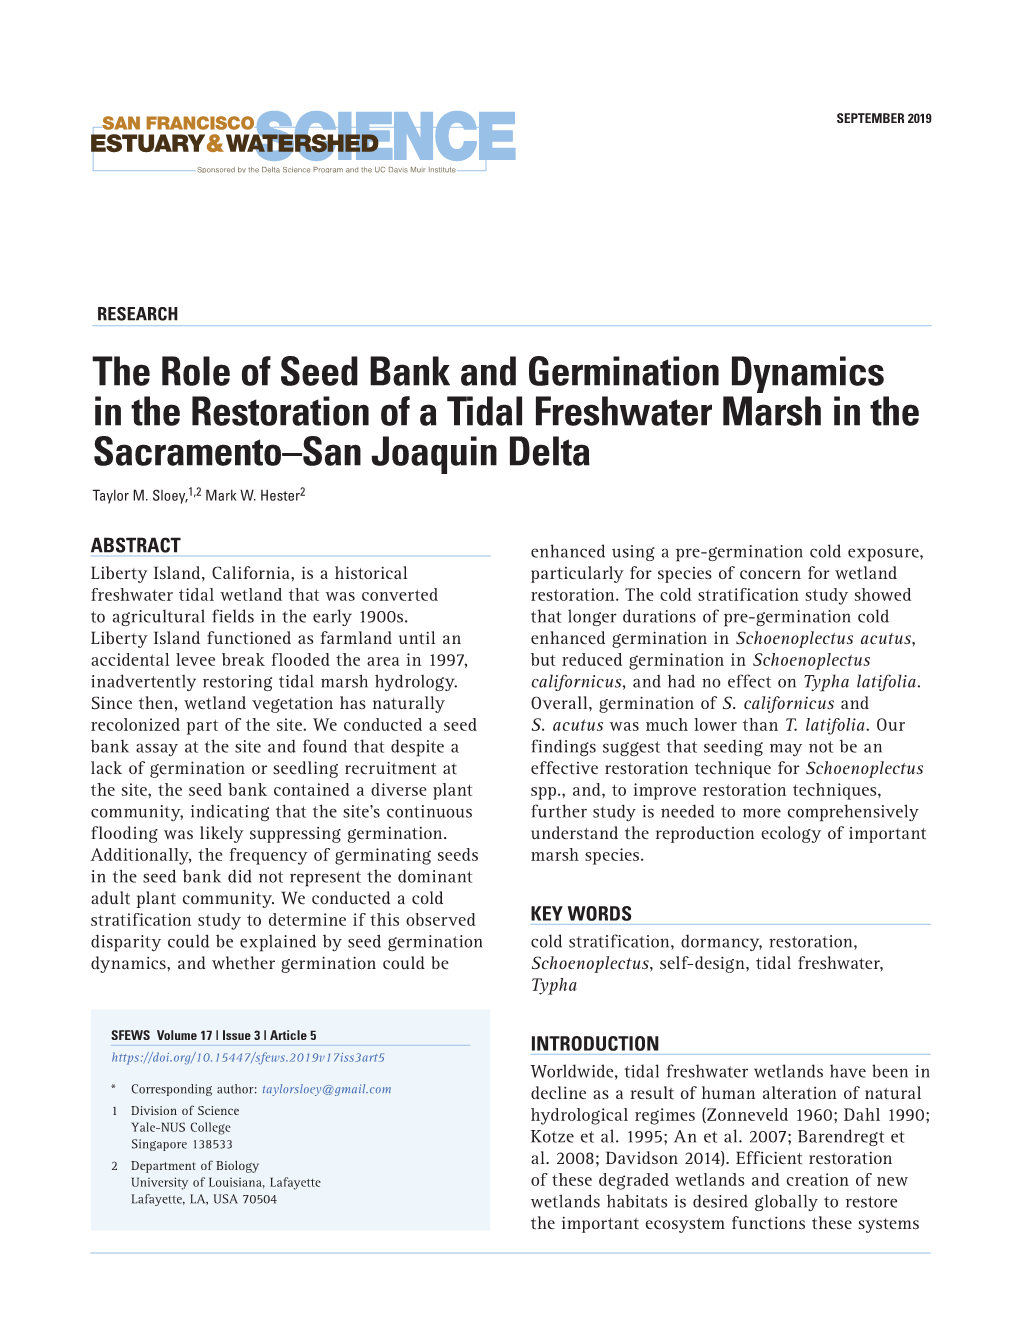 The Role of Seed Bank and Germination Dynamics in the Restoration of a Tidal Freshwater Marsh in the Sacramento–San Joaquin Delta Taylor M